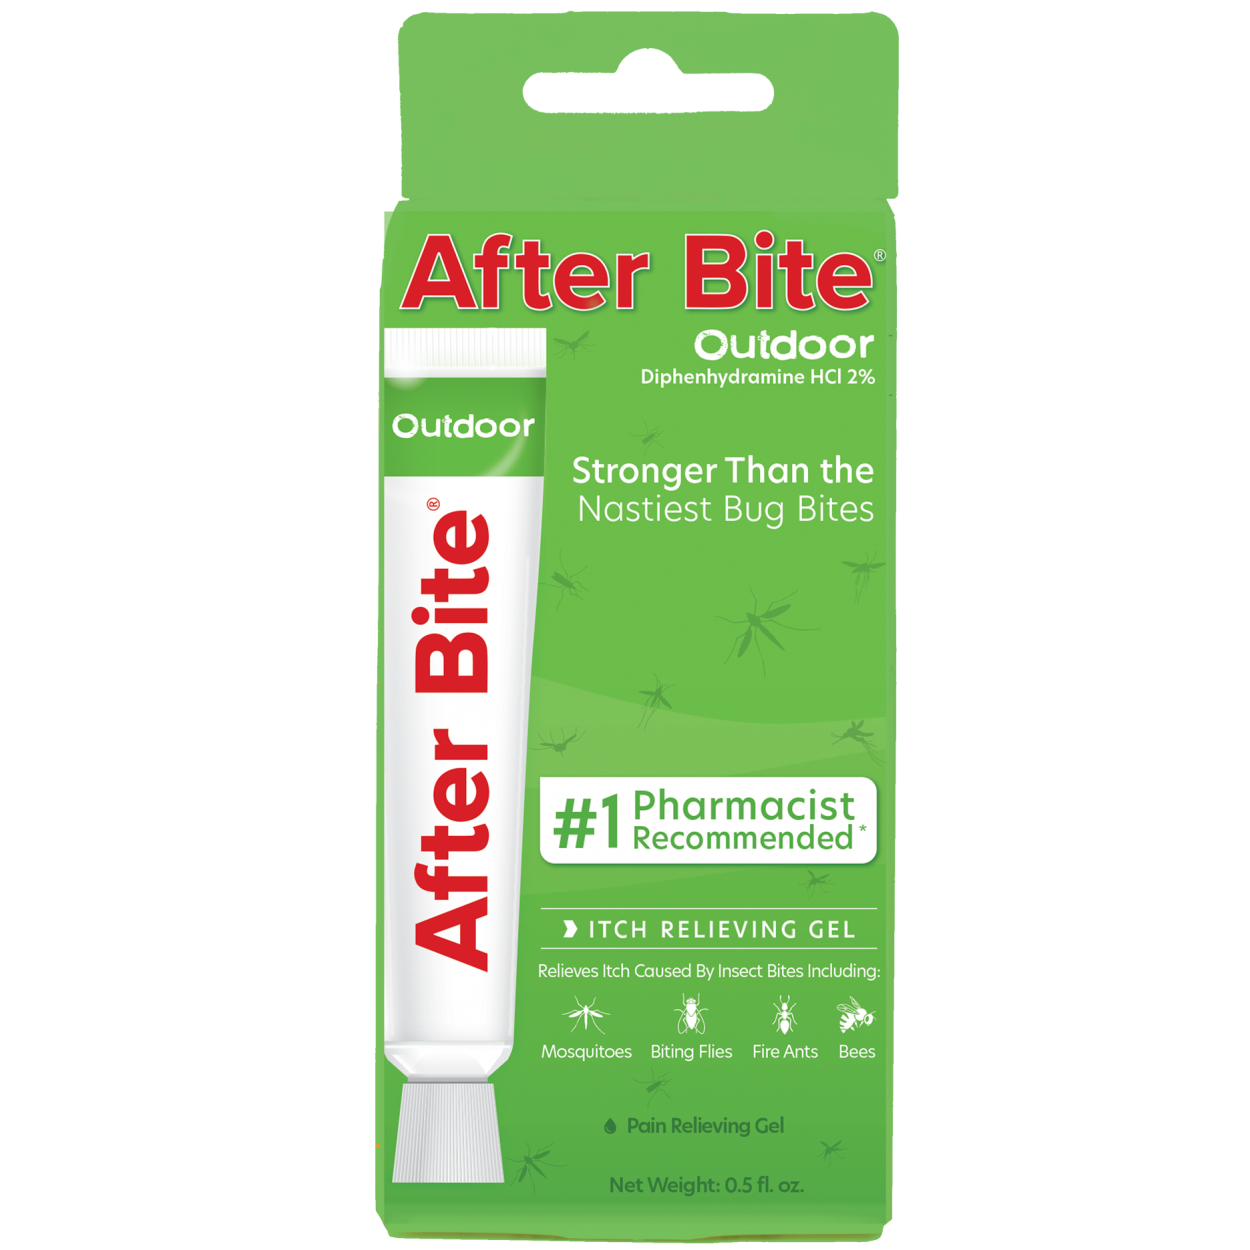 After Bite ® Outdoor